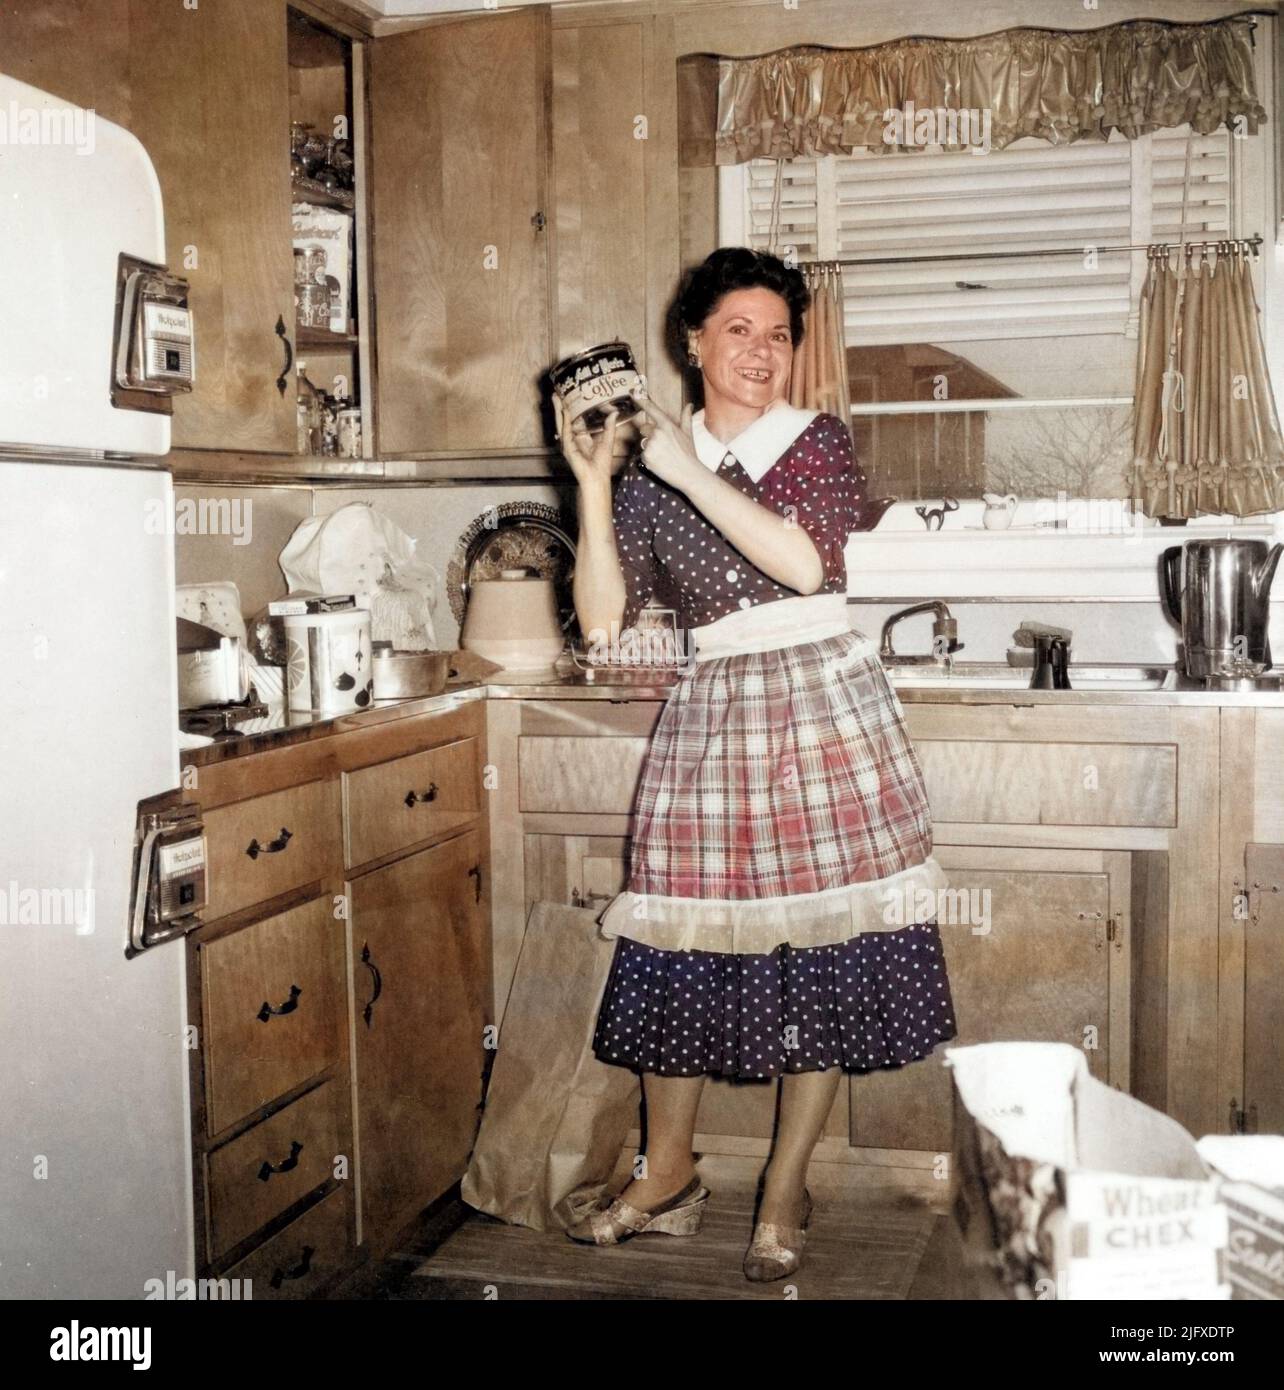 Young suburban housewife in her kitchen holding up a can of Chock full o' Nuts coffee, circa 1950s, USA. Stock Photo